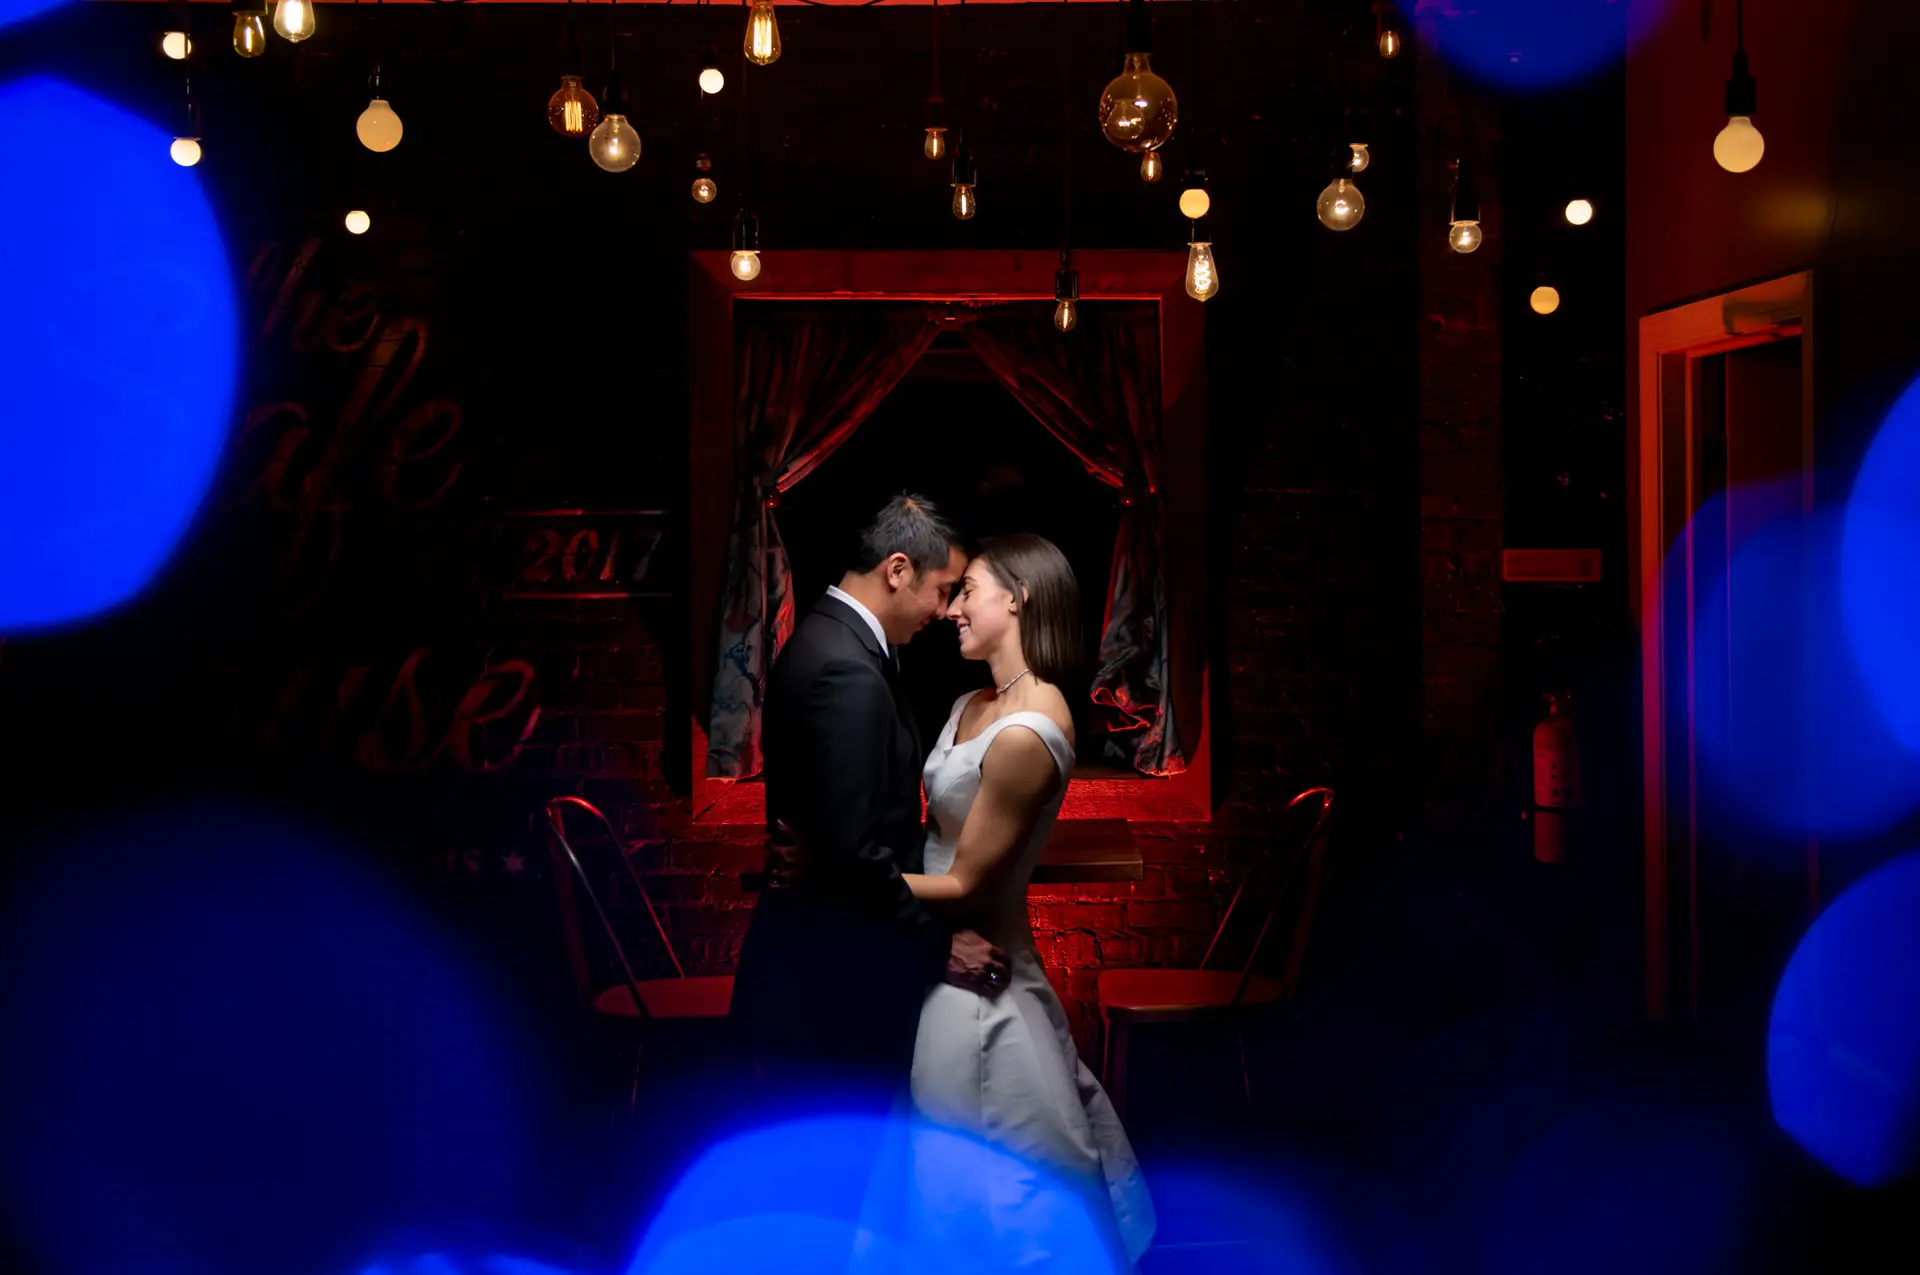 bride-groom-together-under-lights-with-red-background-the-joinery-chicago